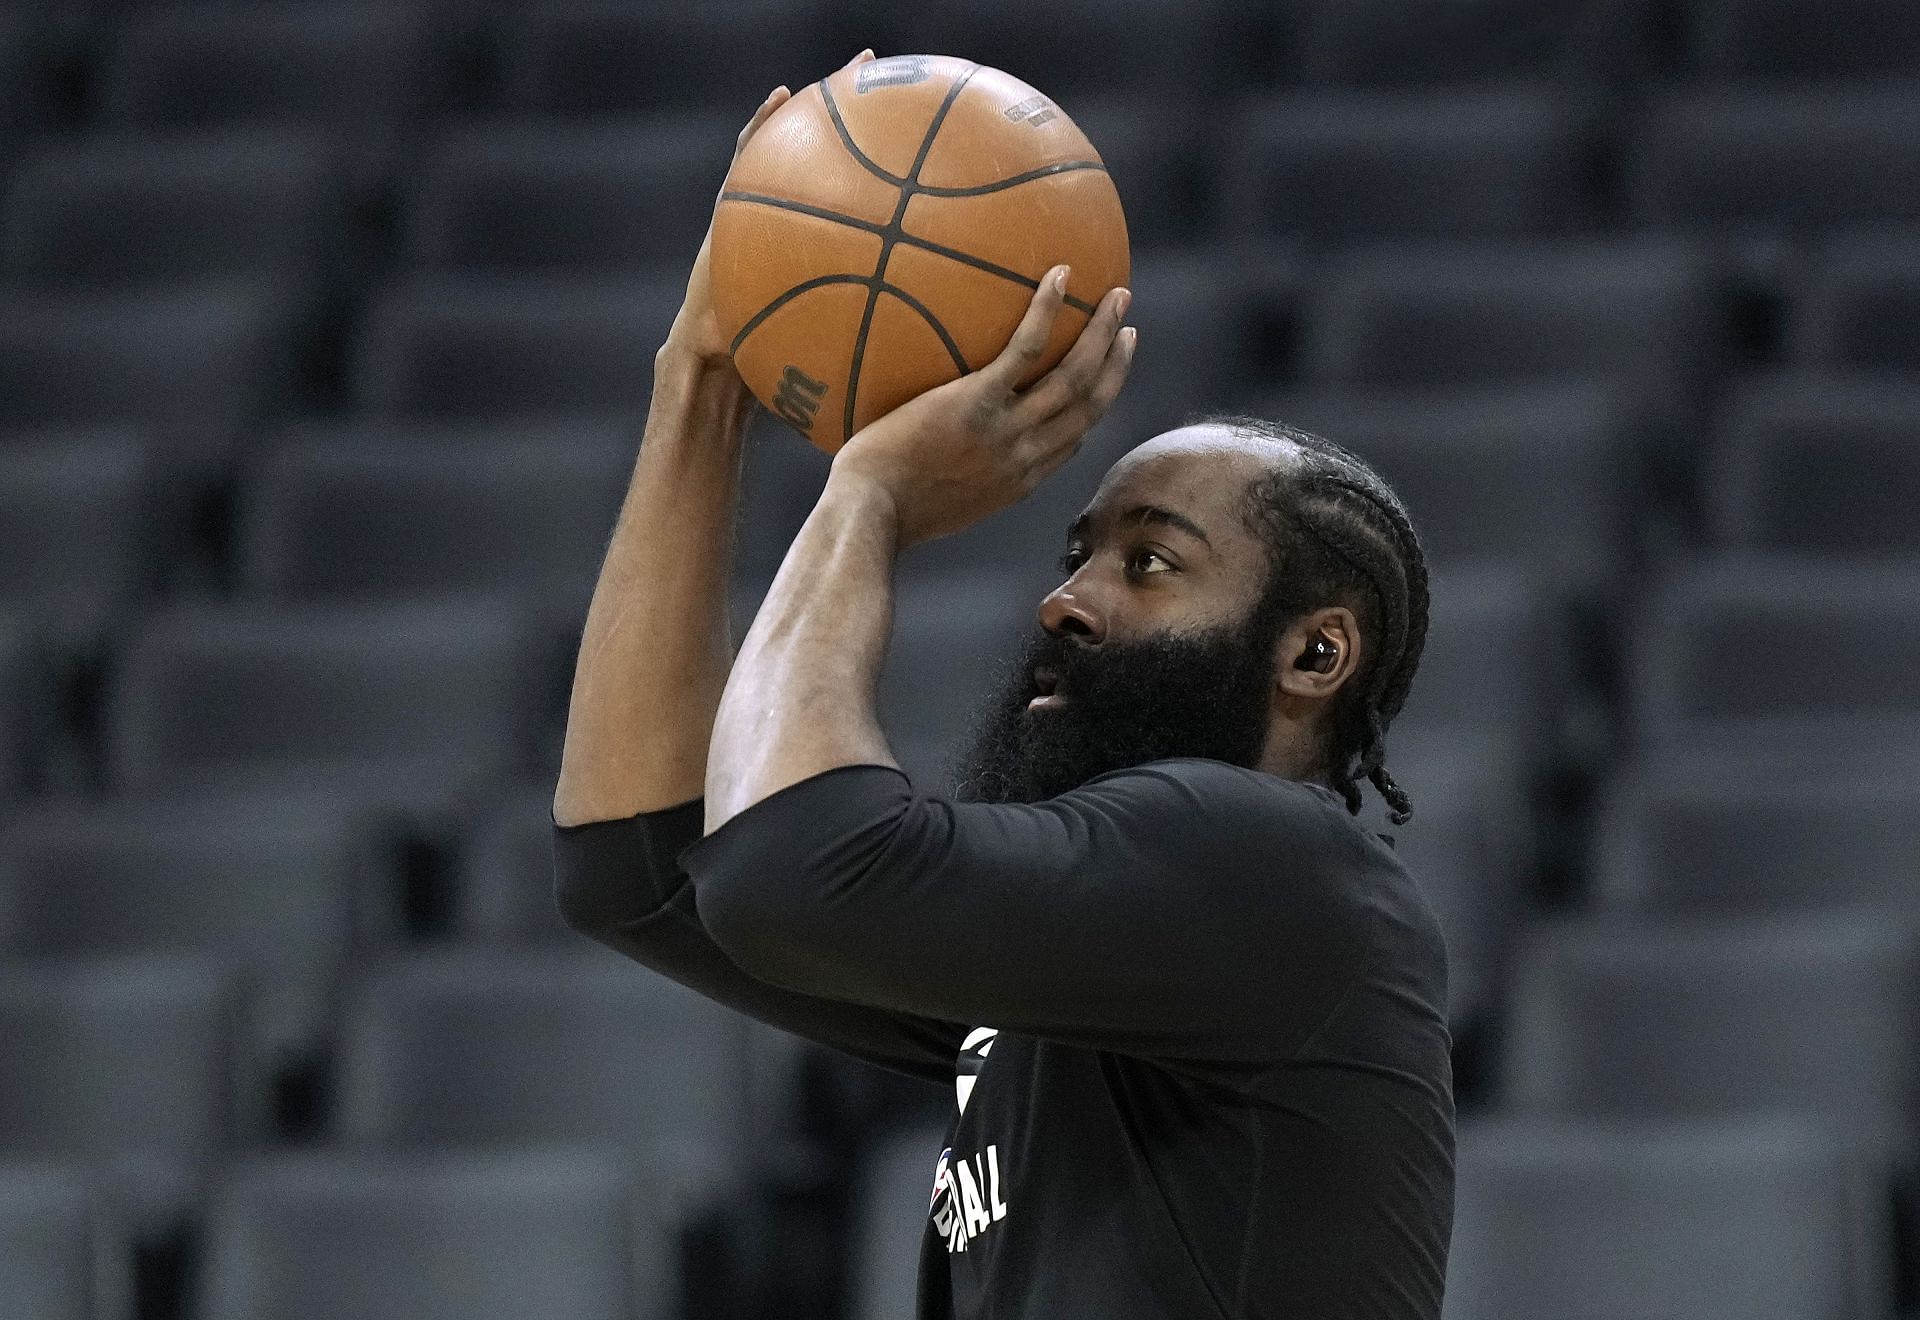 James Harden warms up ahead of a game